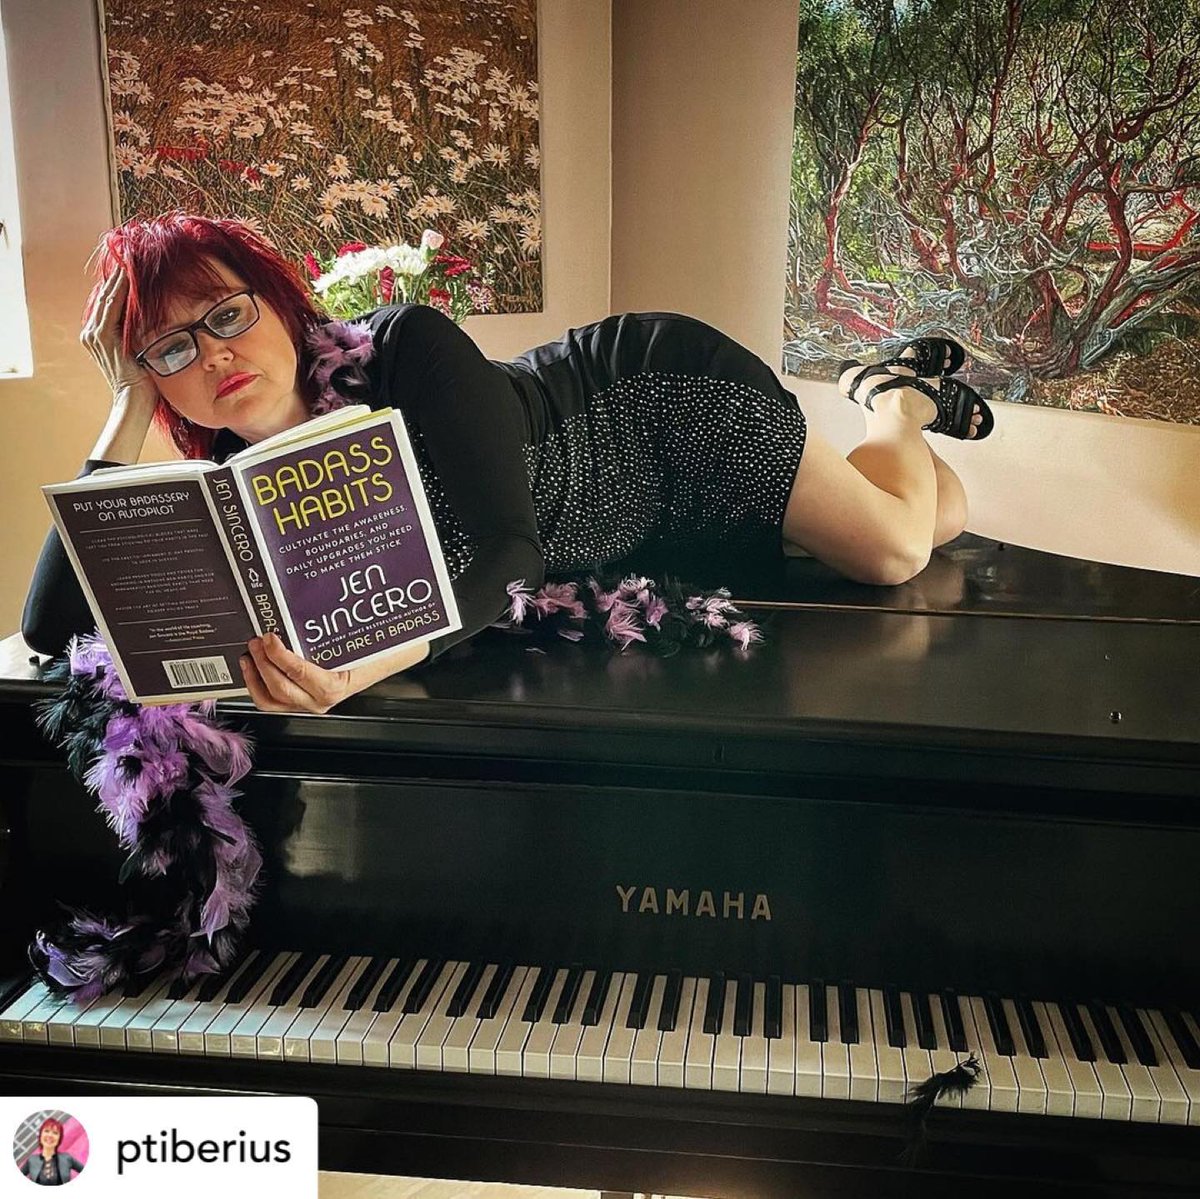 Share your Badassery with the world why doncha? Post a creative/hilarious pic w/my book(s) on Instagram, tag @JenSincero and include #badassoftheweek for a chance to be reposted all over my social media!